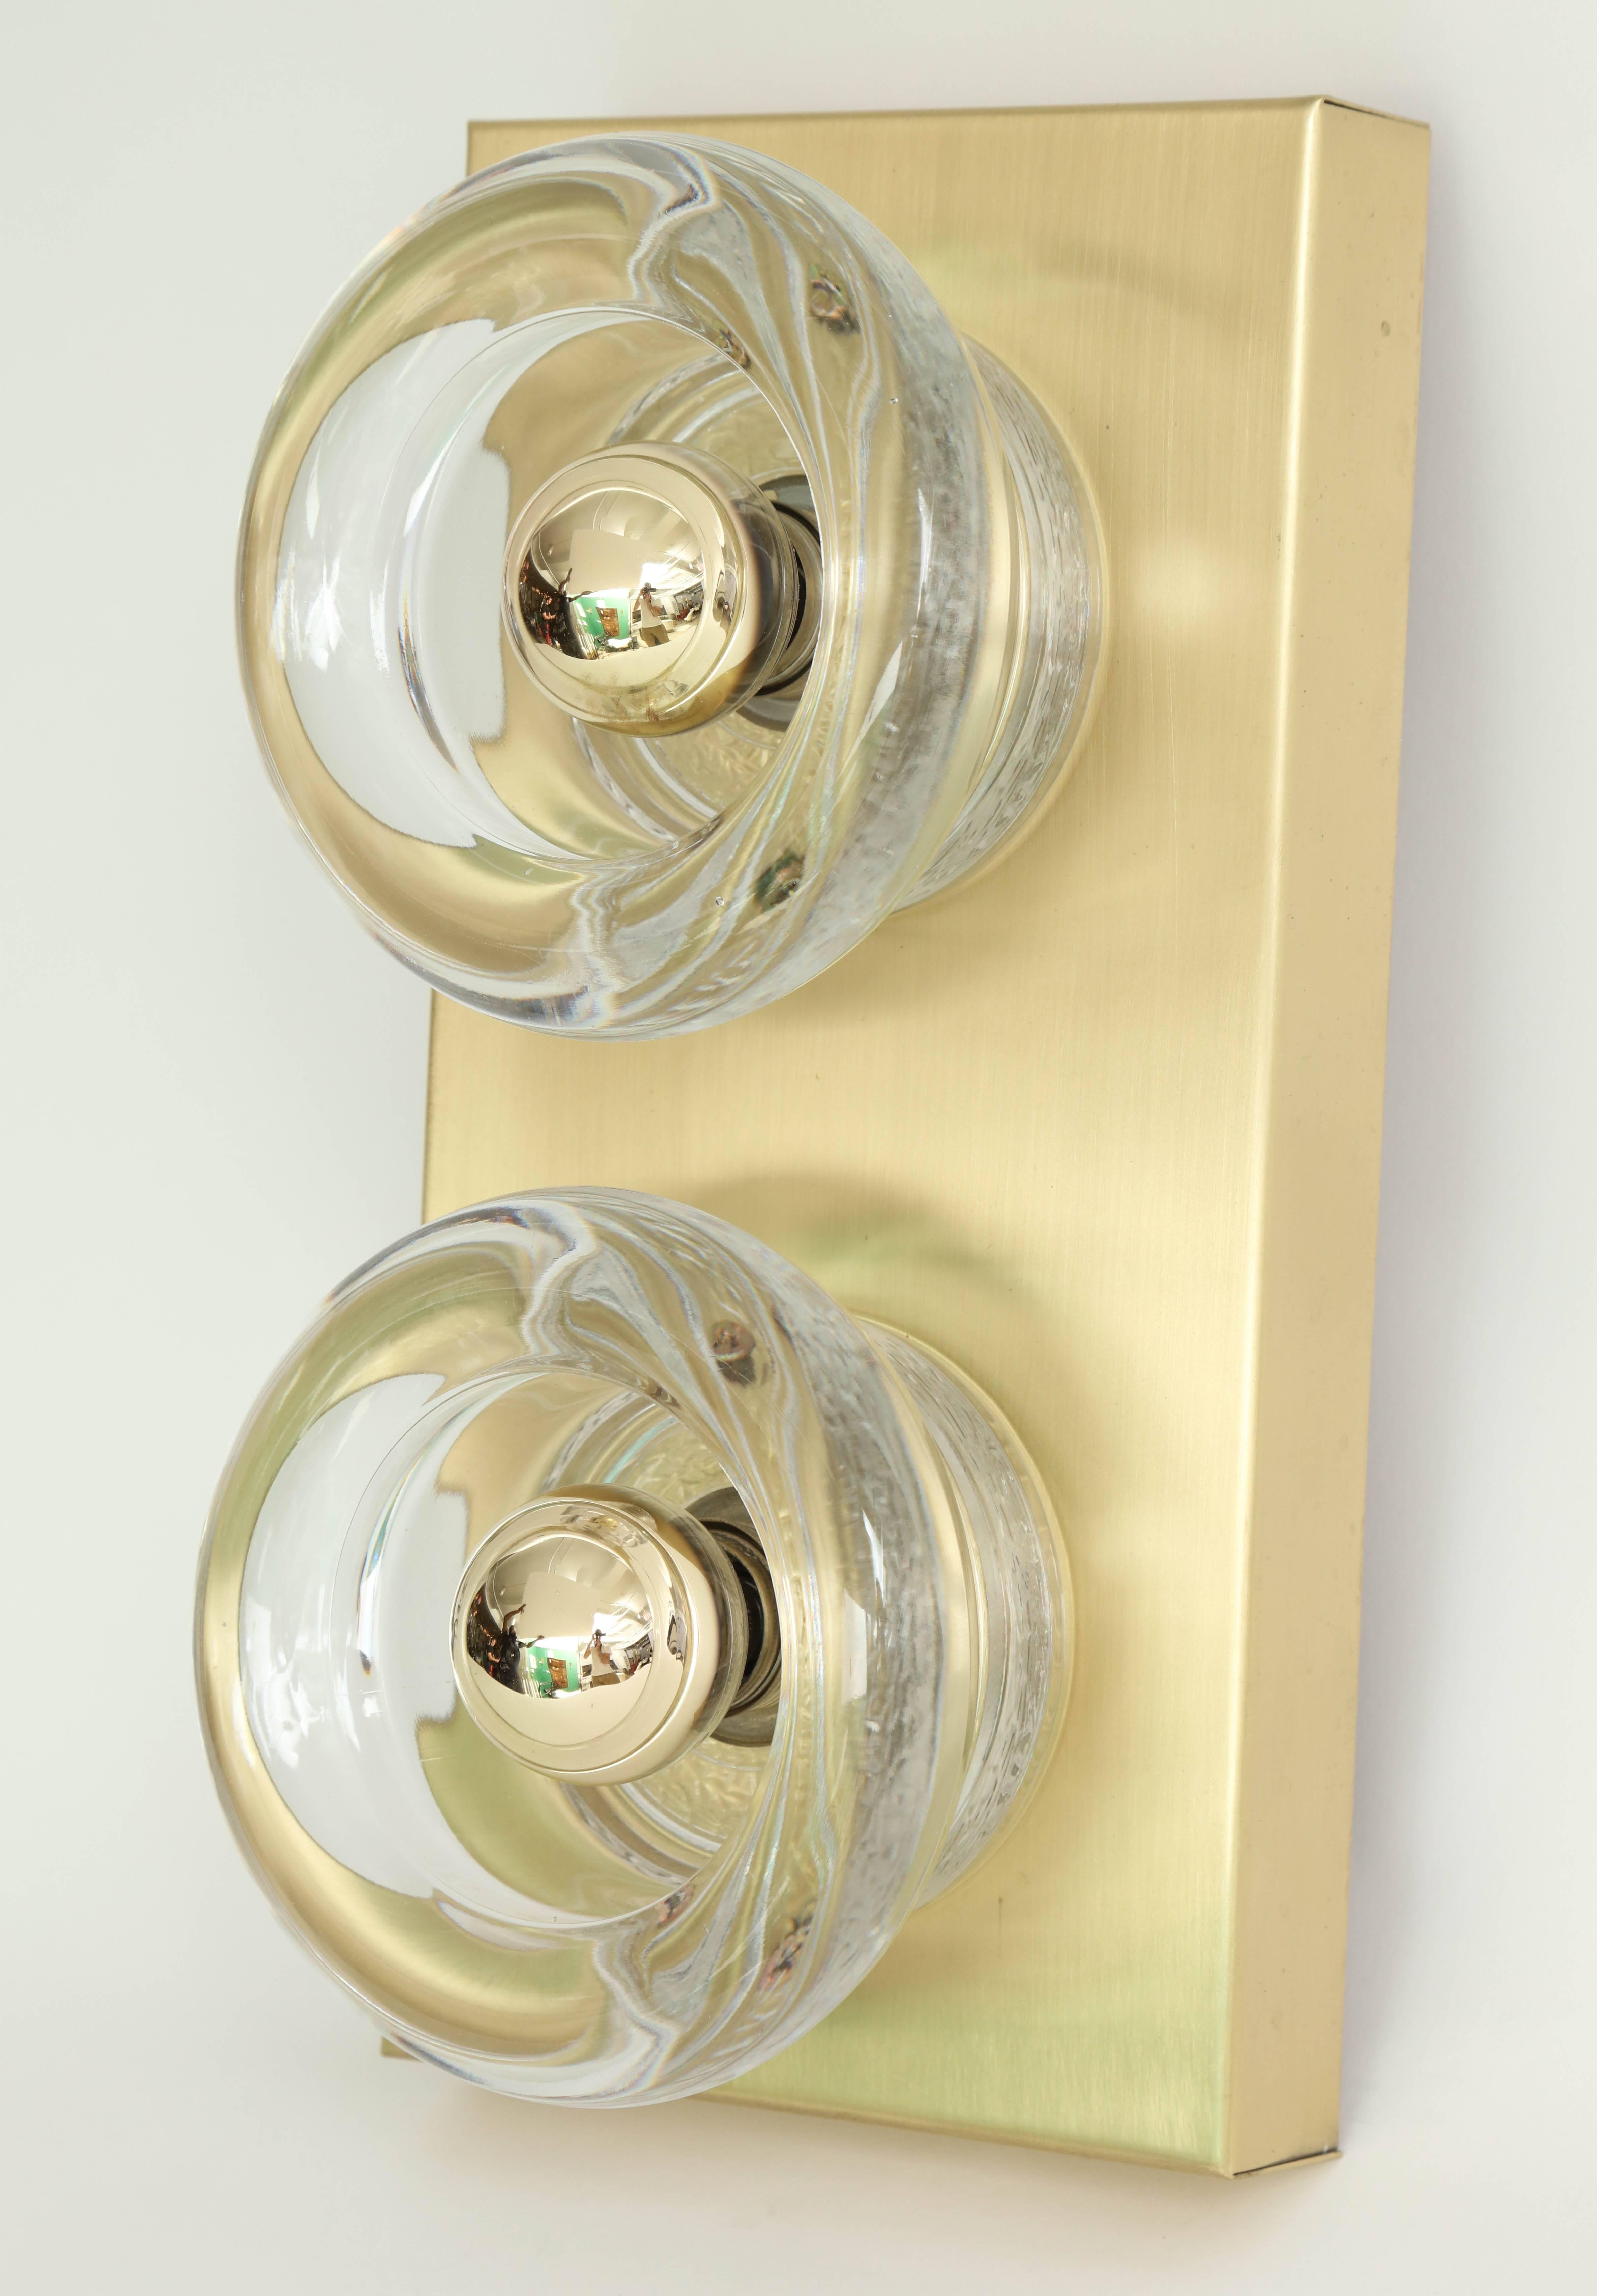 Pair of midcentury classic sconces composed of brushed brass back plates and two molded glass elements by Cosack. Rewired for use in the USA.